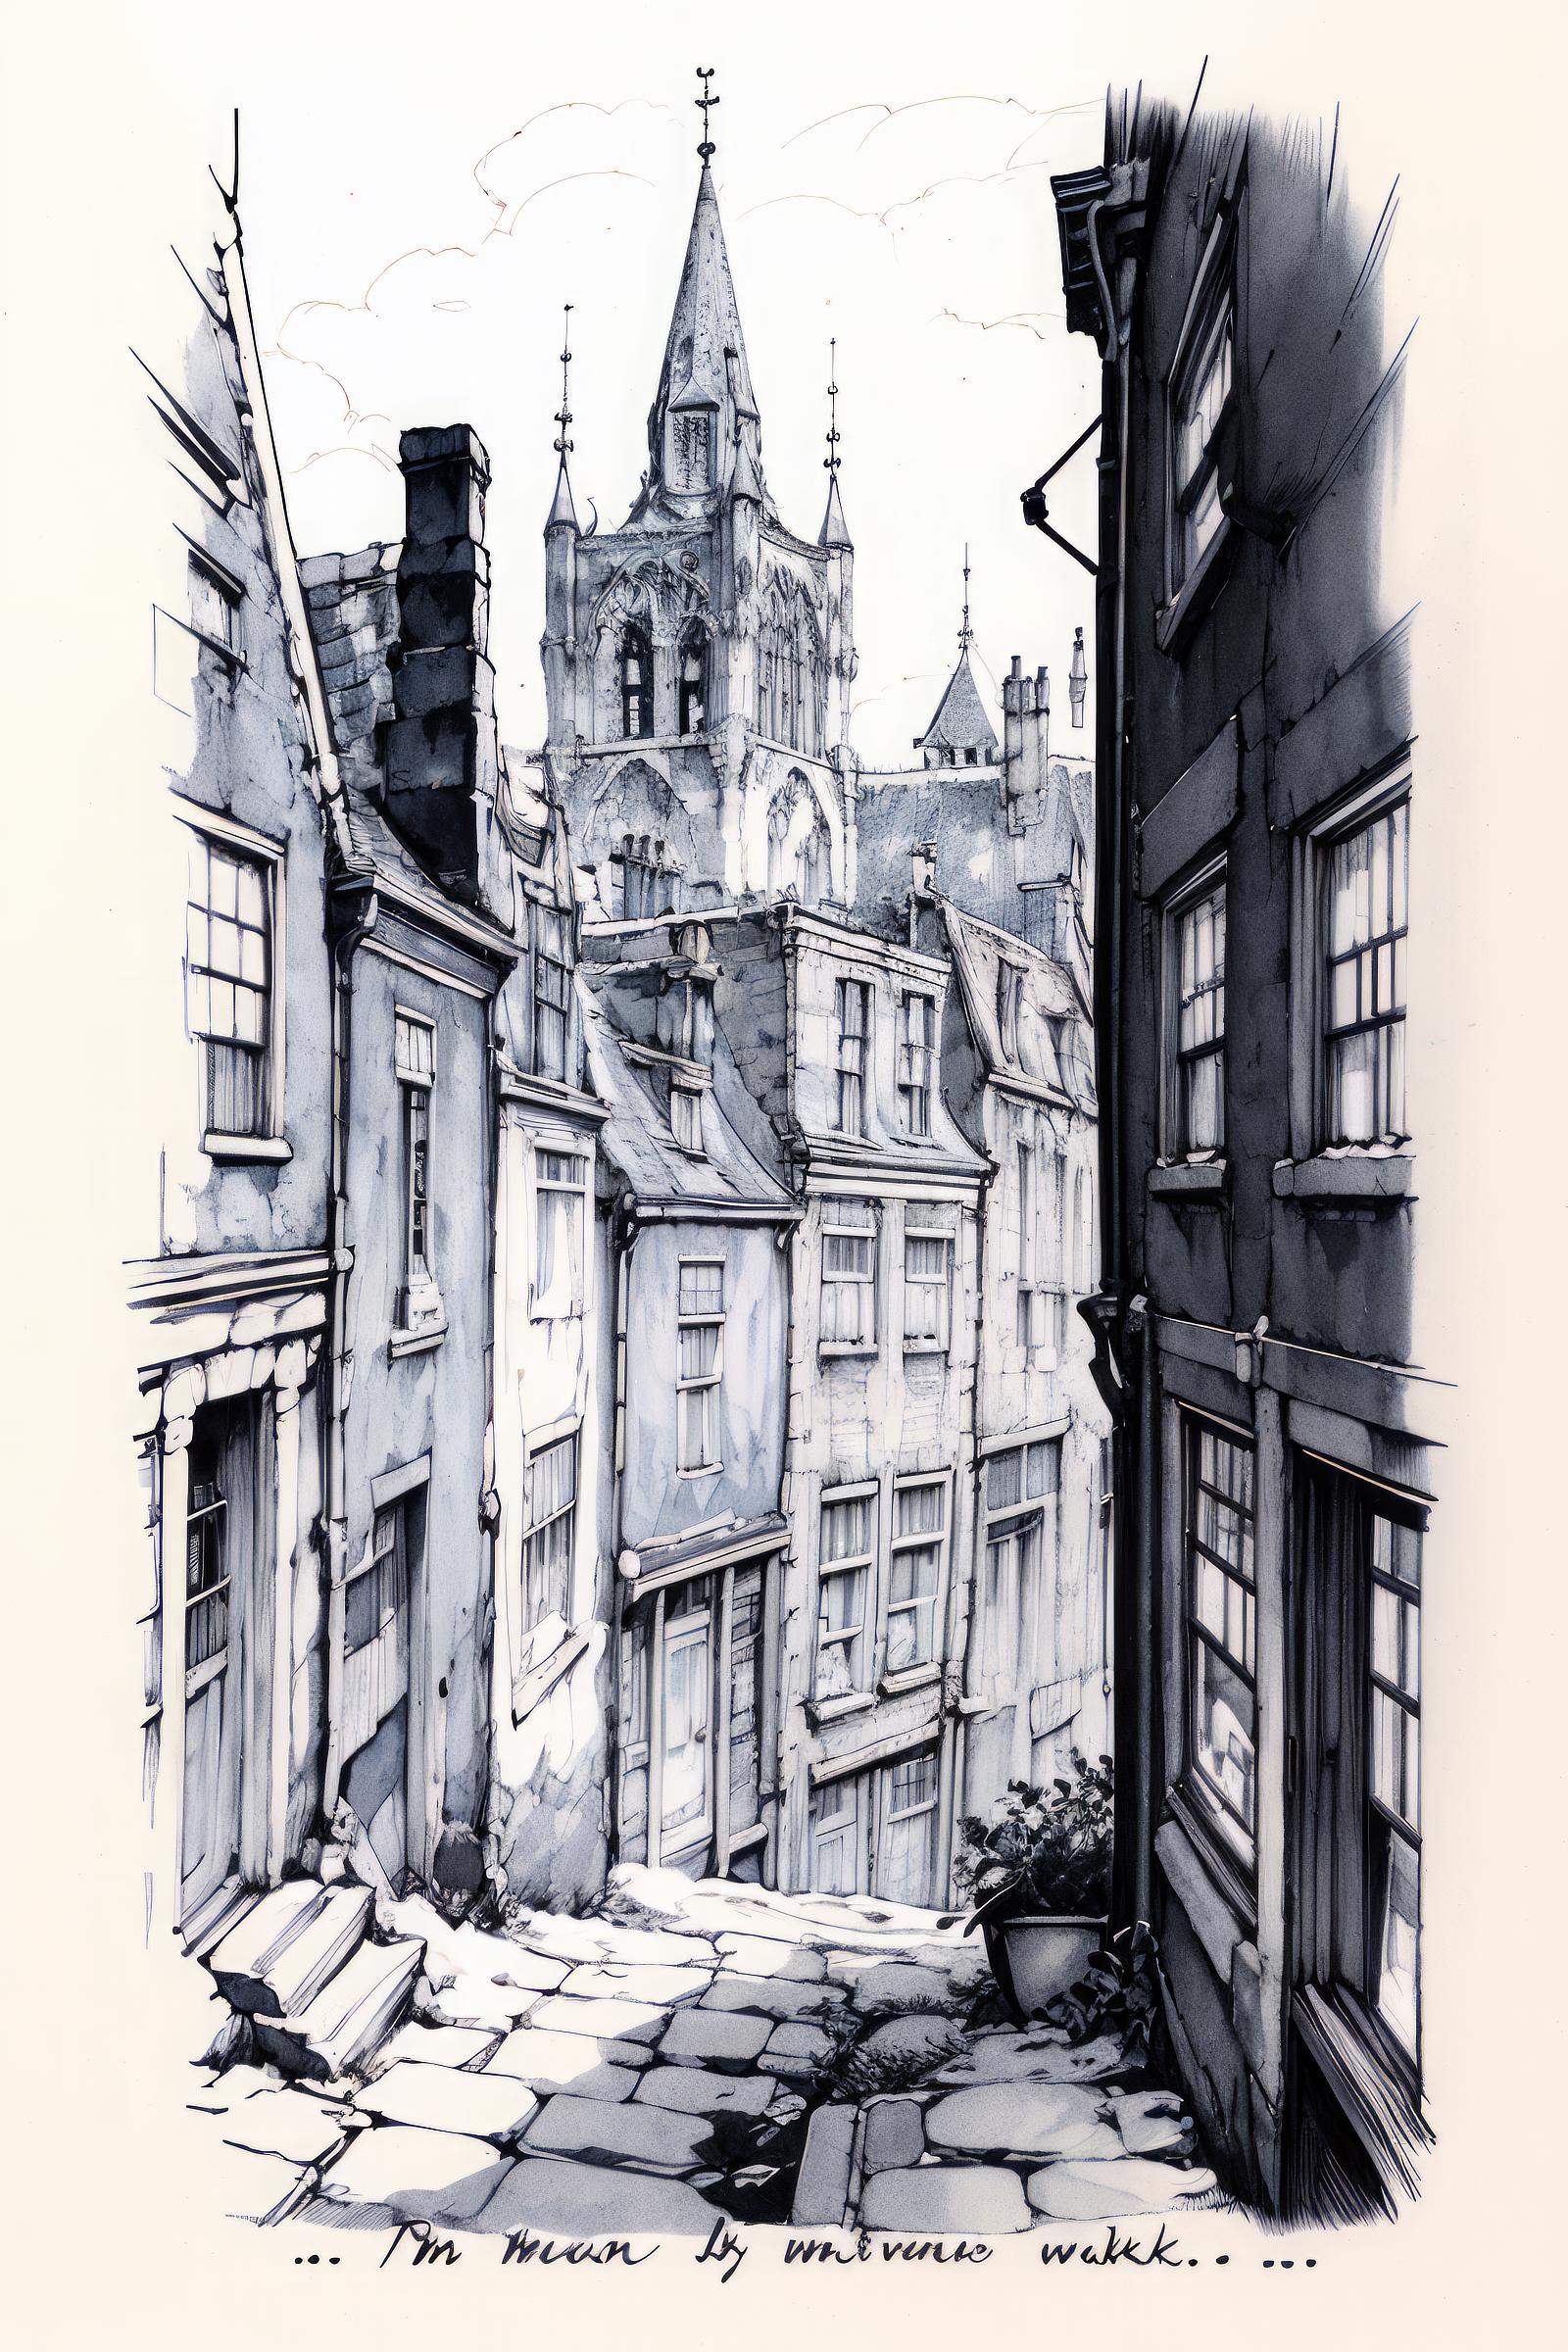 A black and white drawing of a narrow alley between old buildings.